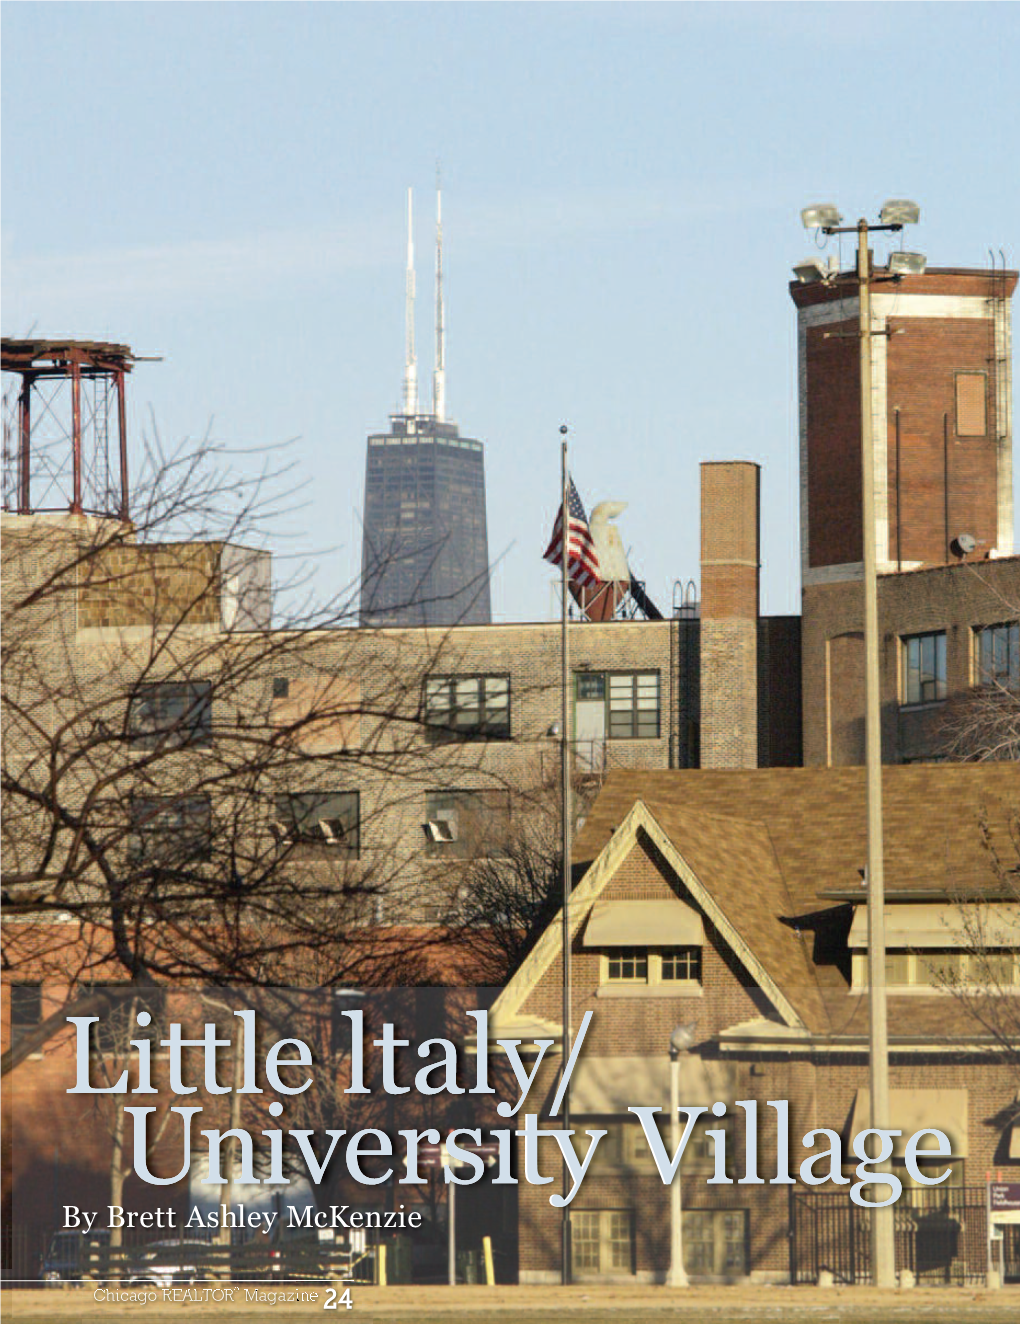 Little Italy and University Village Offer a Unique Combination of Storied Historic Culture and Contemporary Renewal